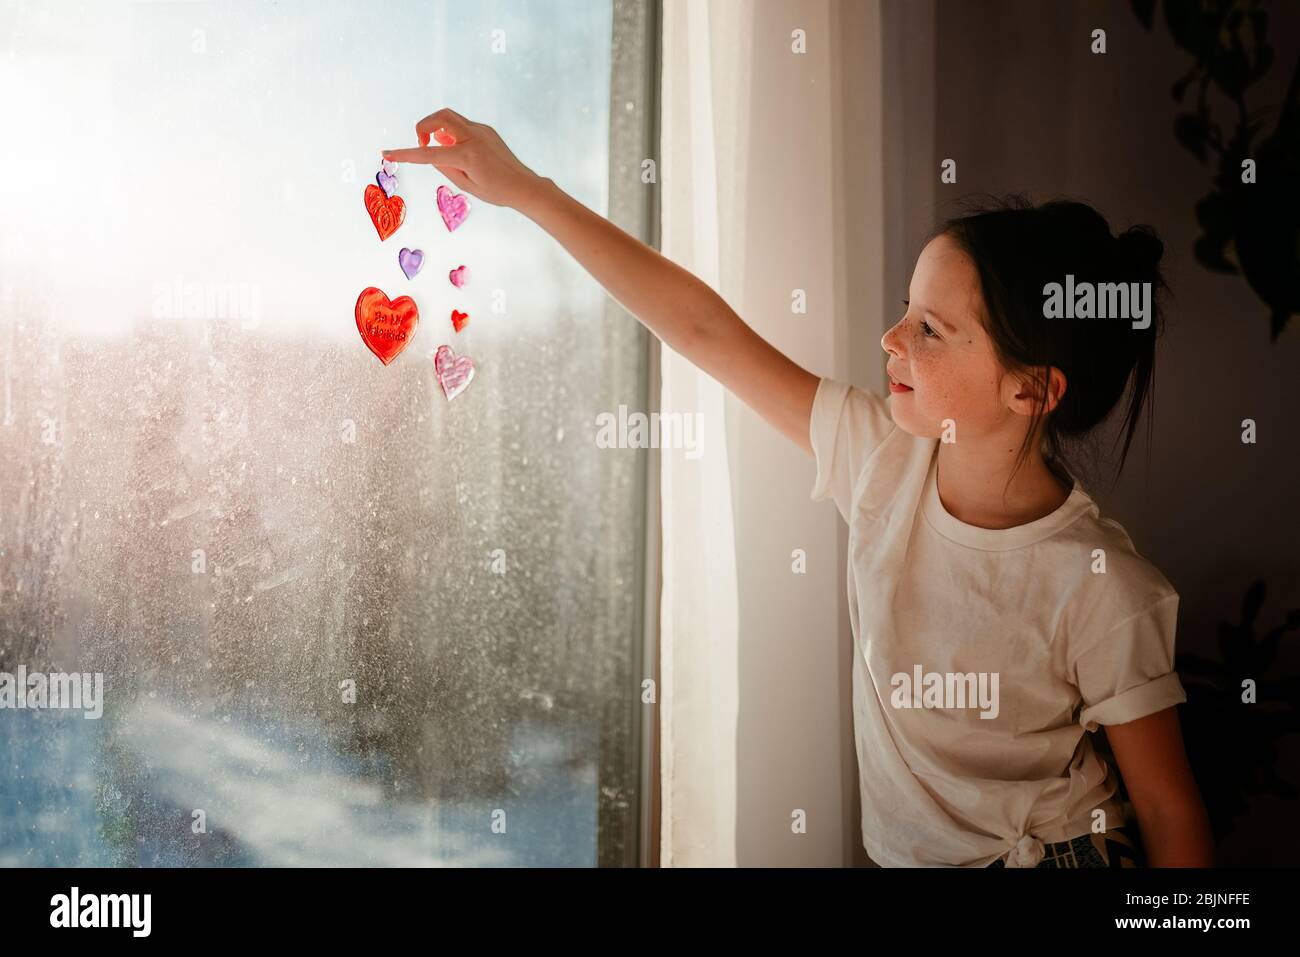 Girl sticking heart decorations on a window Stock Photo